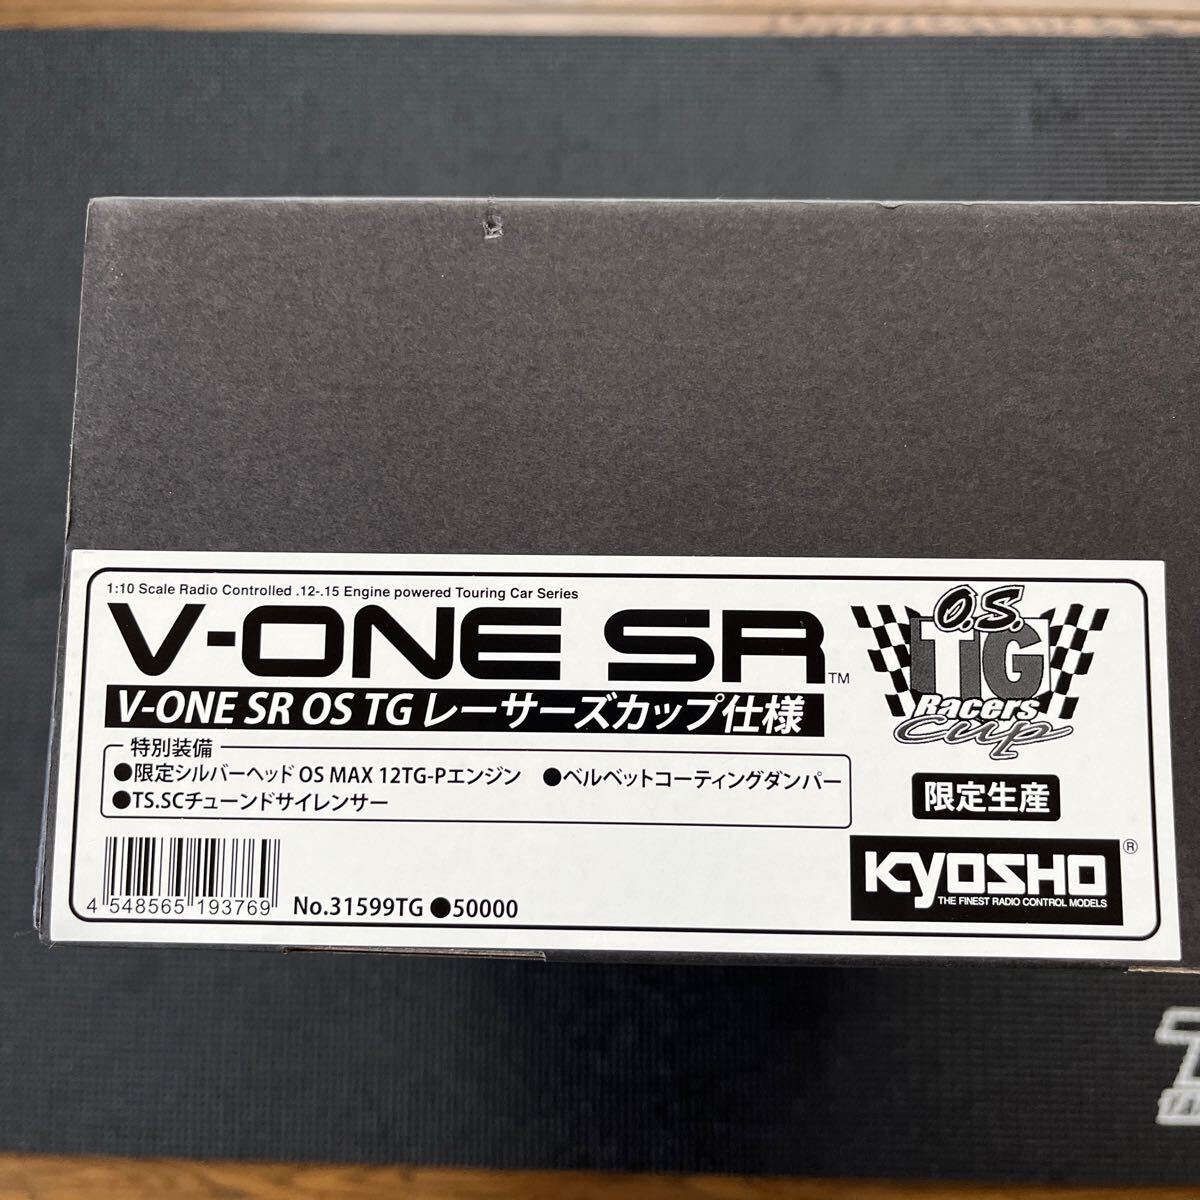  Kyosho V-ONE SR OS TG Racer z cup specification 12TG-P engine attaching kit 